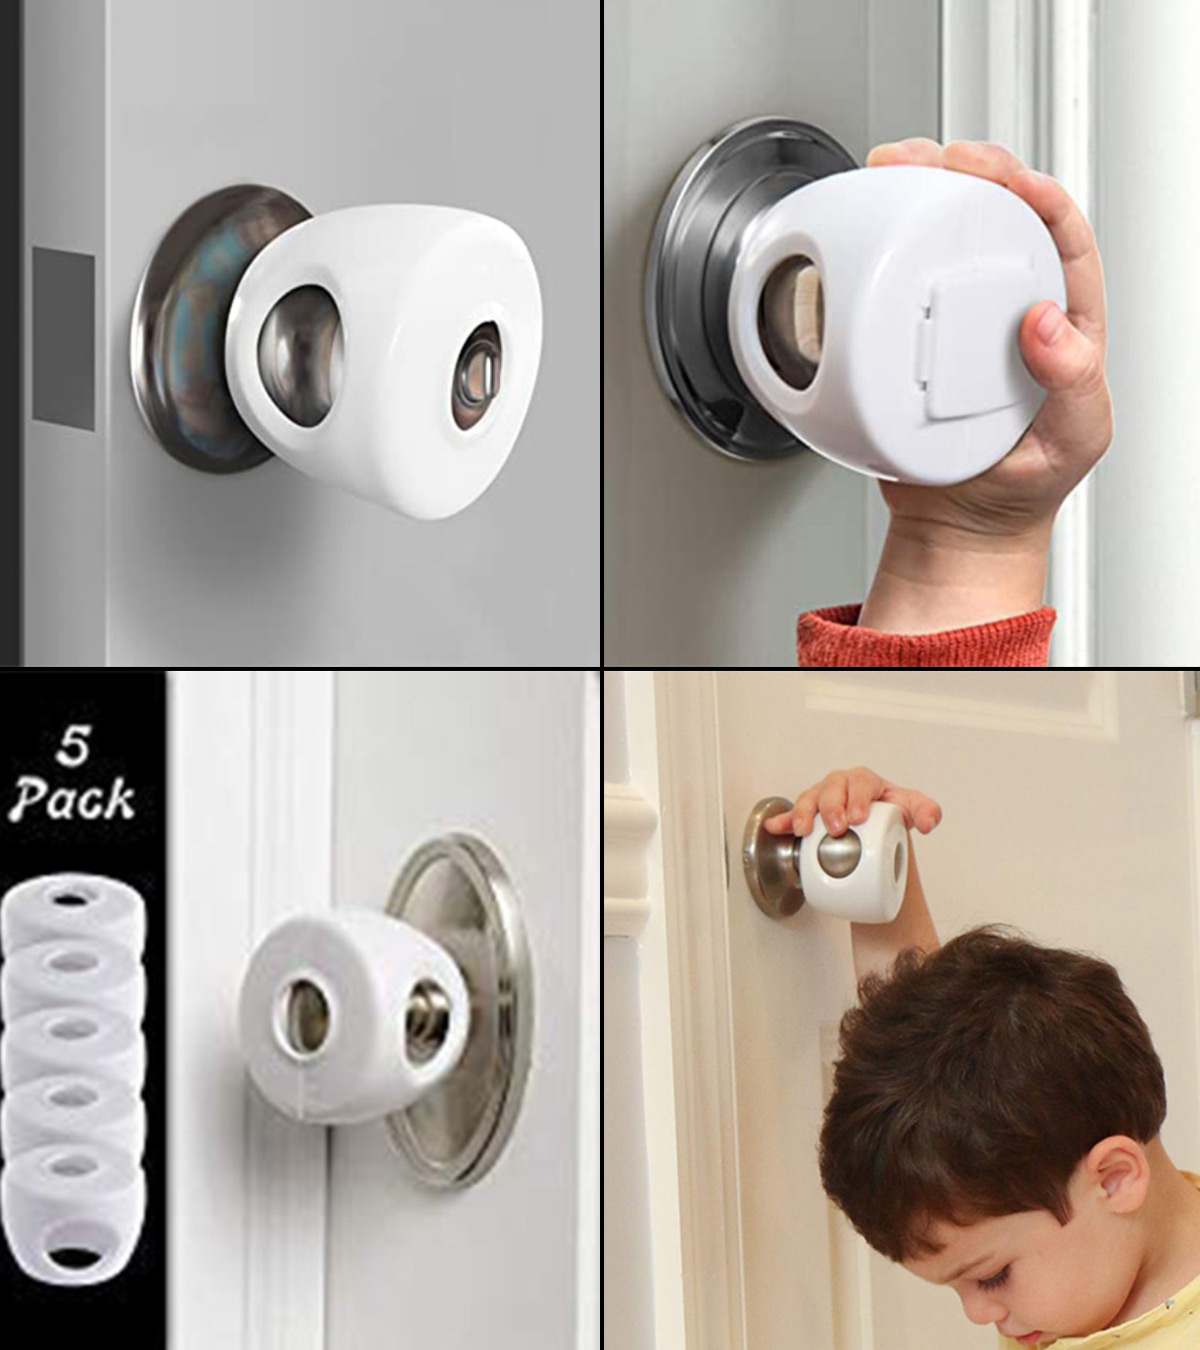 Child Proof Doors MMBABY Door Knob Covers Child Safety Cover 4 PACK 4 Pack 